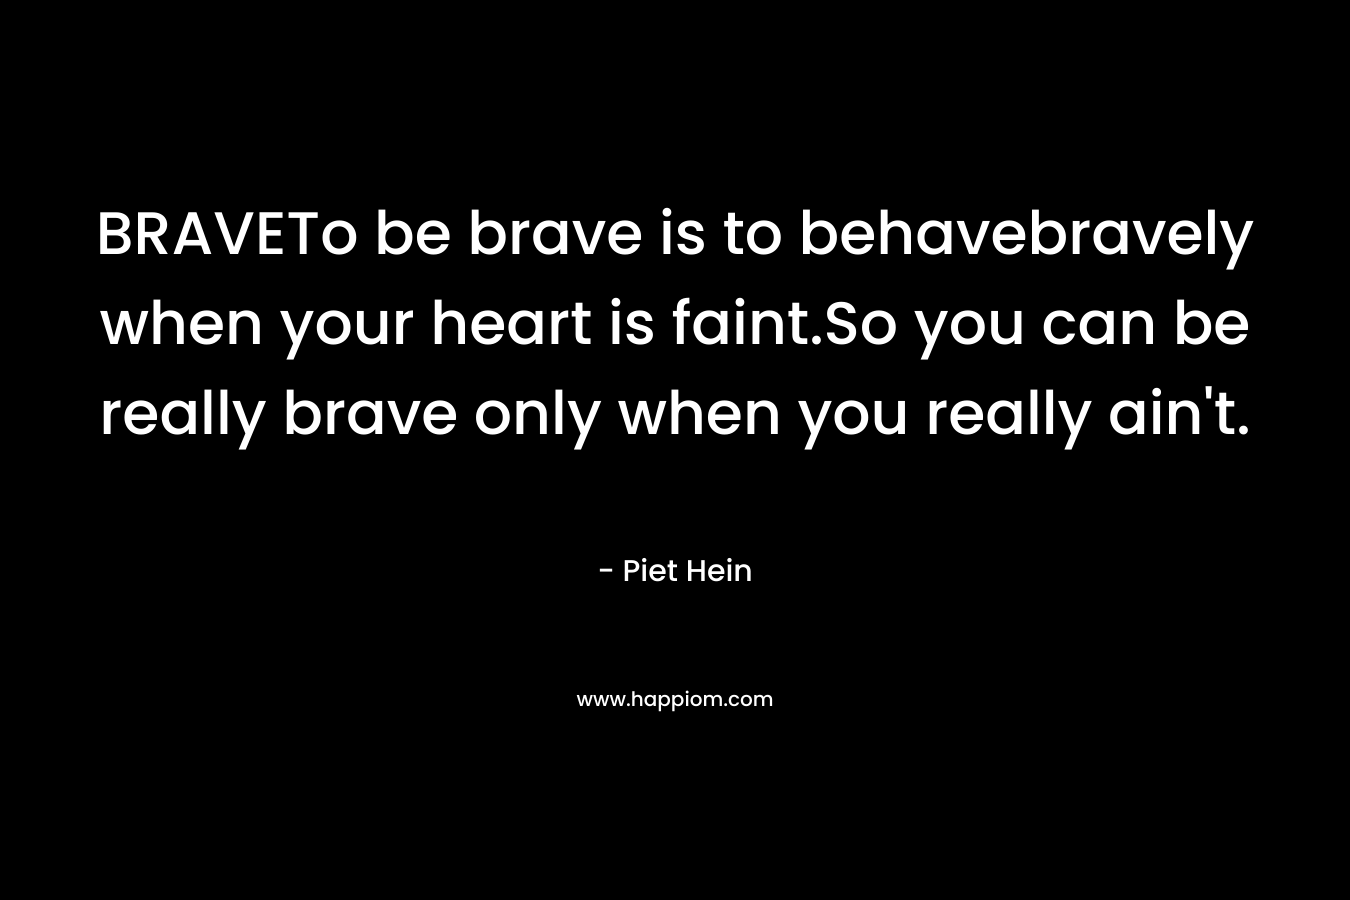 BRAVETo be brave is to behavebravely when your heart is faint.So you can be really brave only when you really ain't.